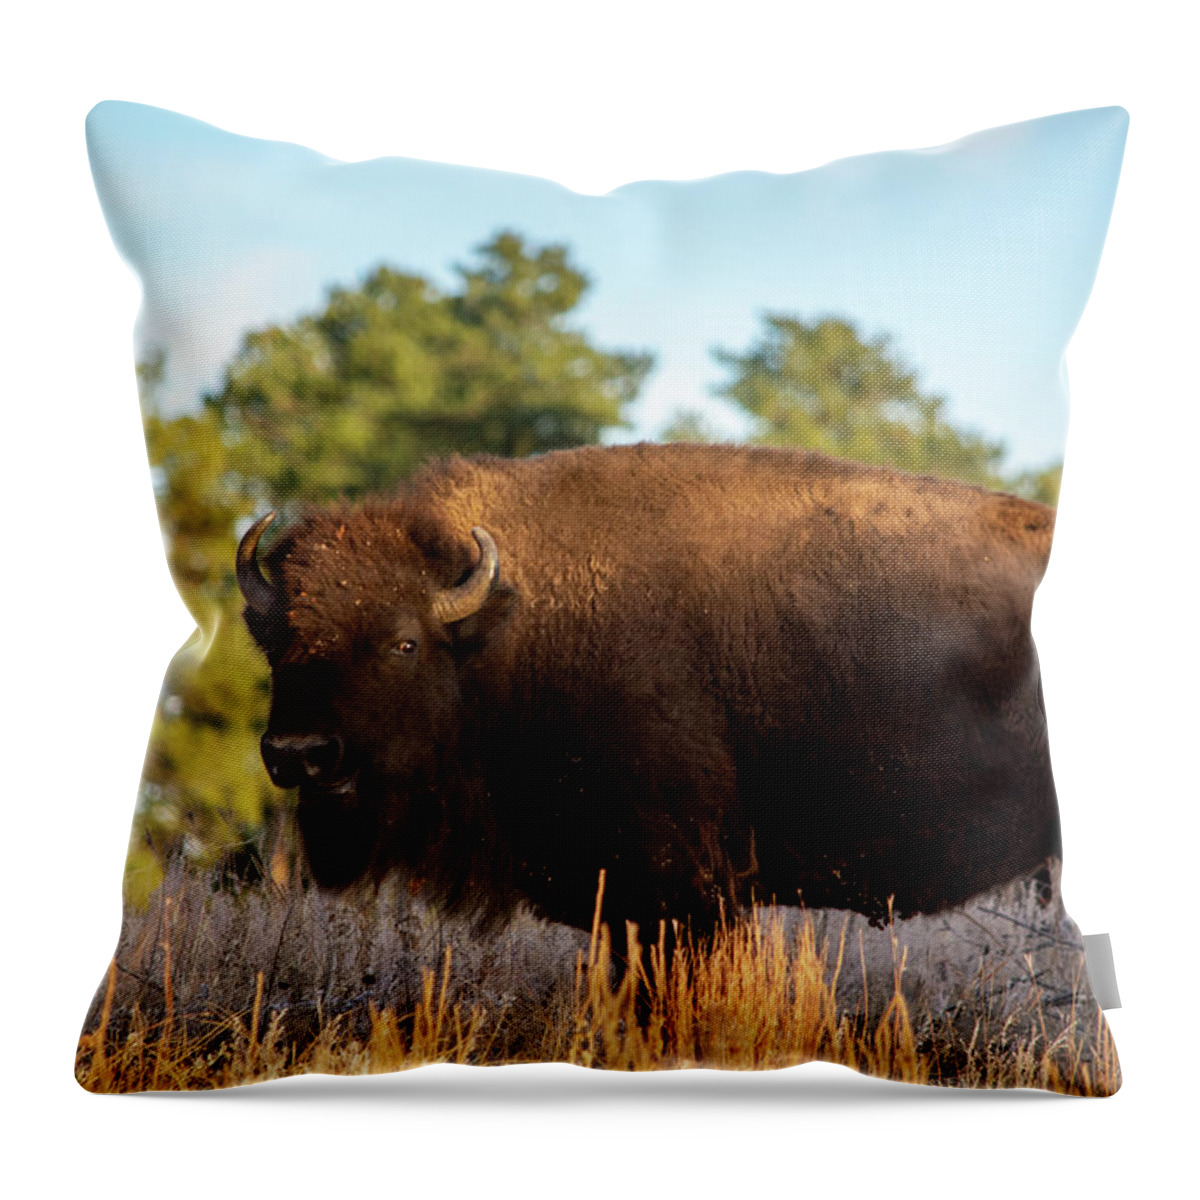 American Bison Throw Pillow featuring the photograph Custer South Dakota Bison by Kyle Hanson